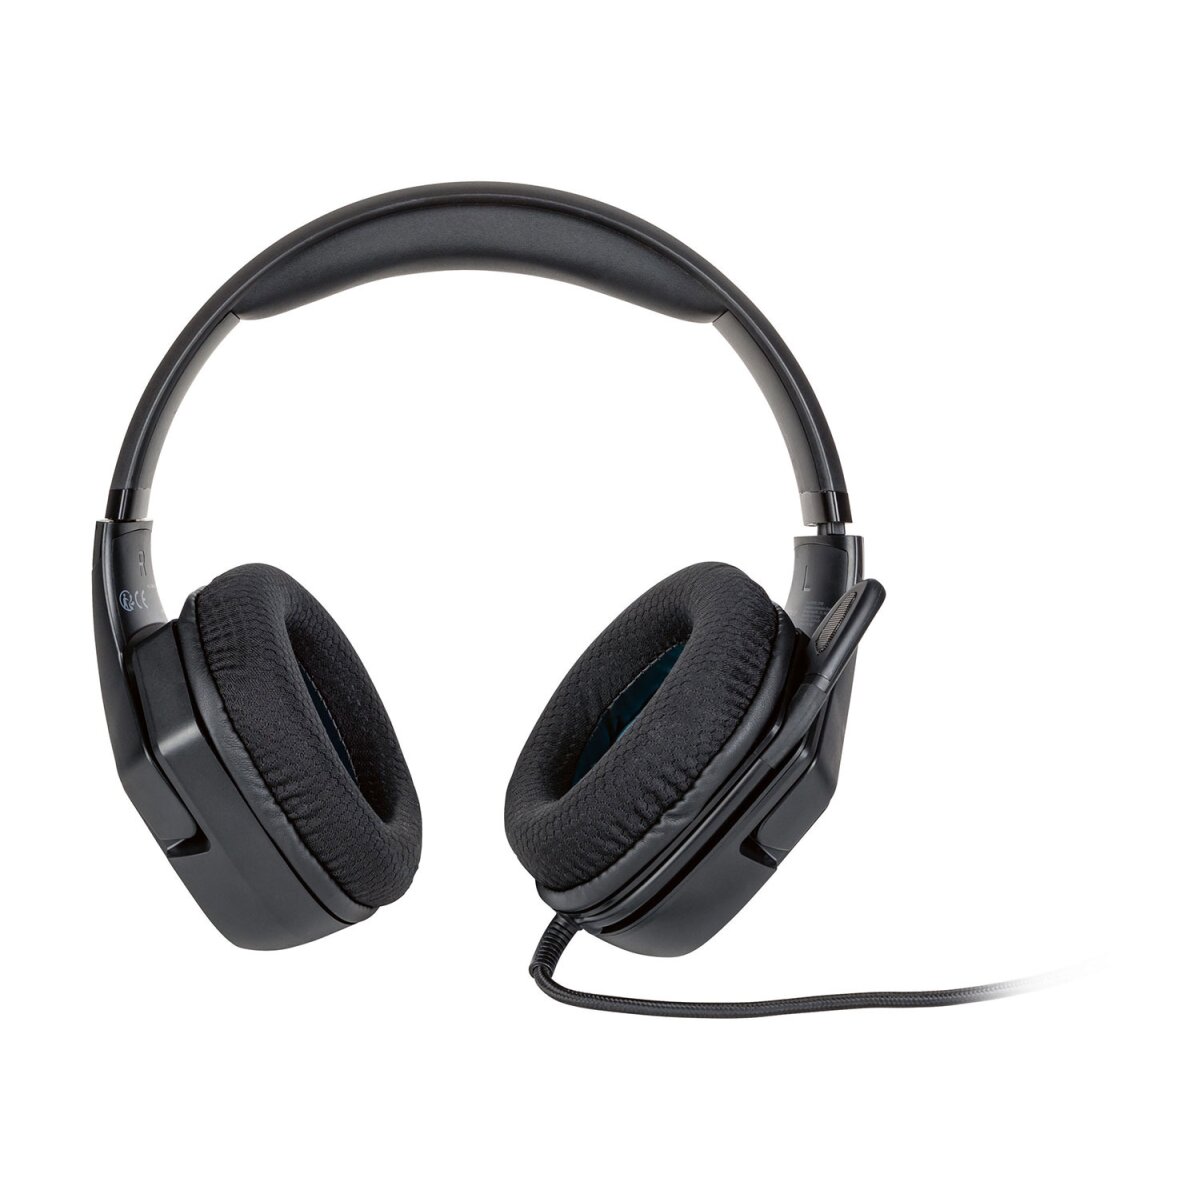 SILVERCREST® 7.1 € gut, Gaming 15,99 B-Ware sehr Headset -